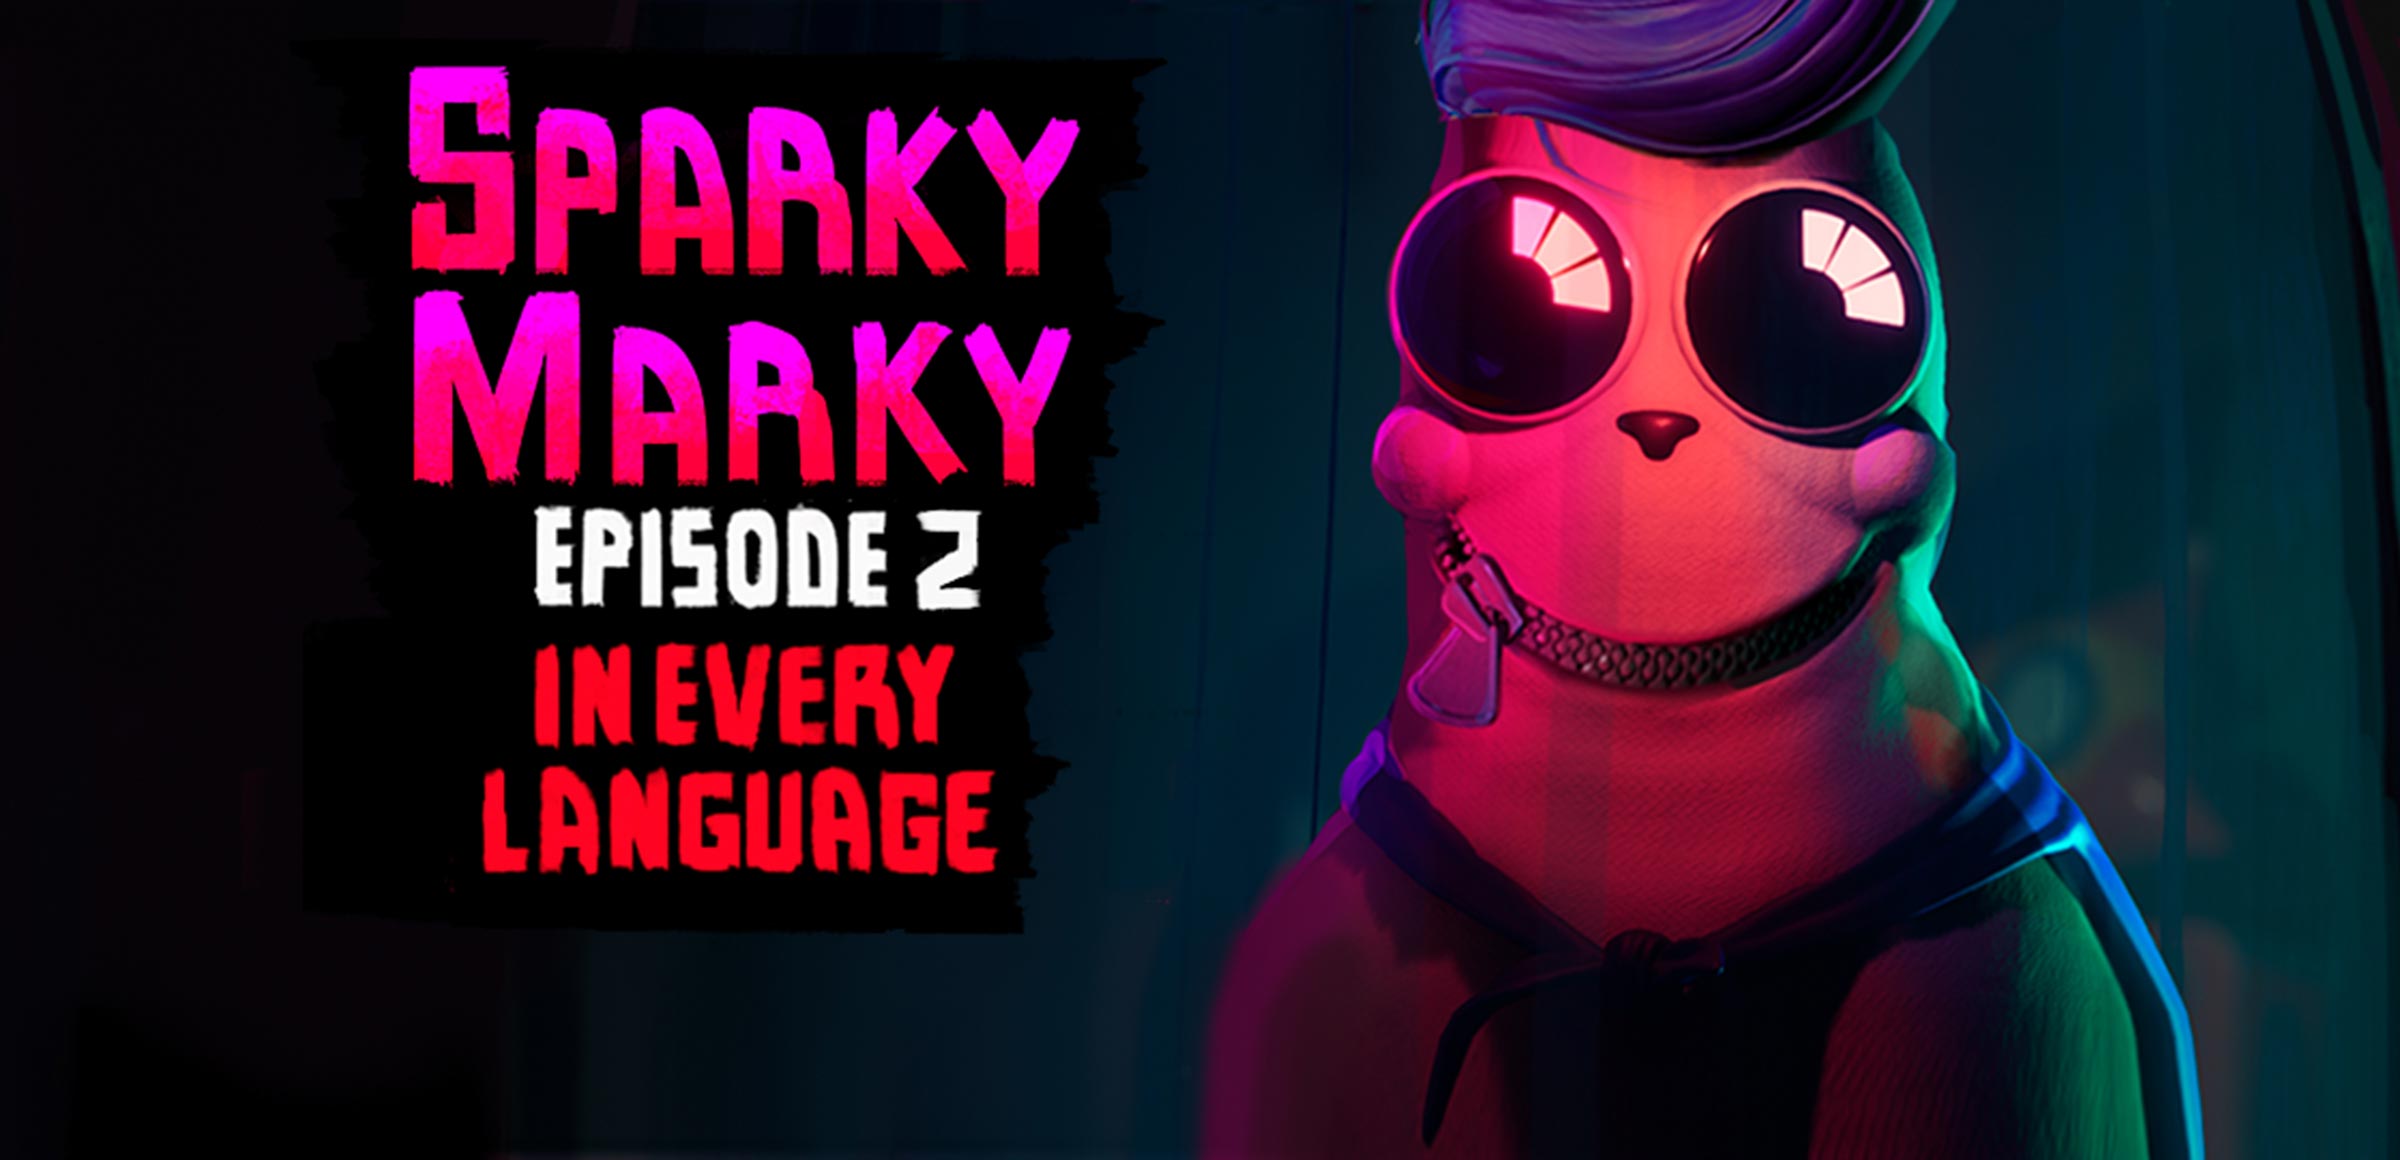 Sparky Marky. Episode 2. In every language